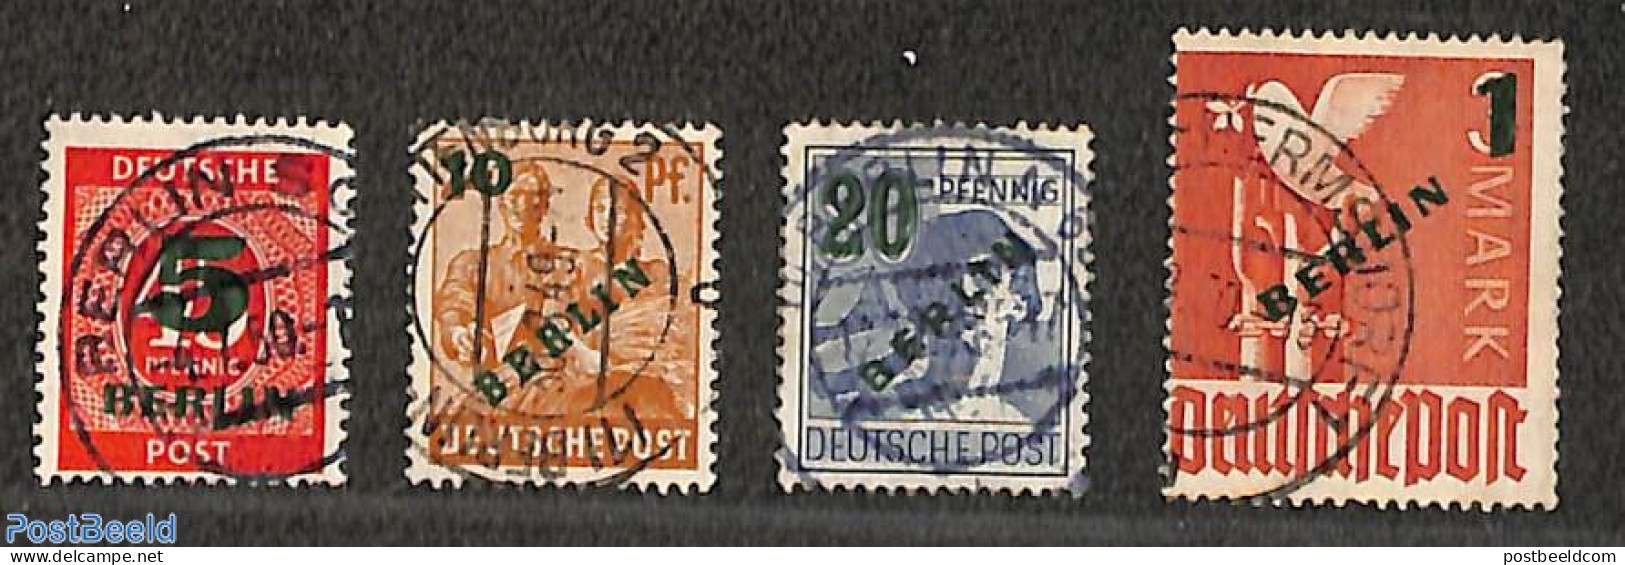 Germany, Berlin 1949 Overprints 4v, Used, Used Or CTO - Used Stamps